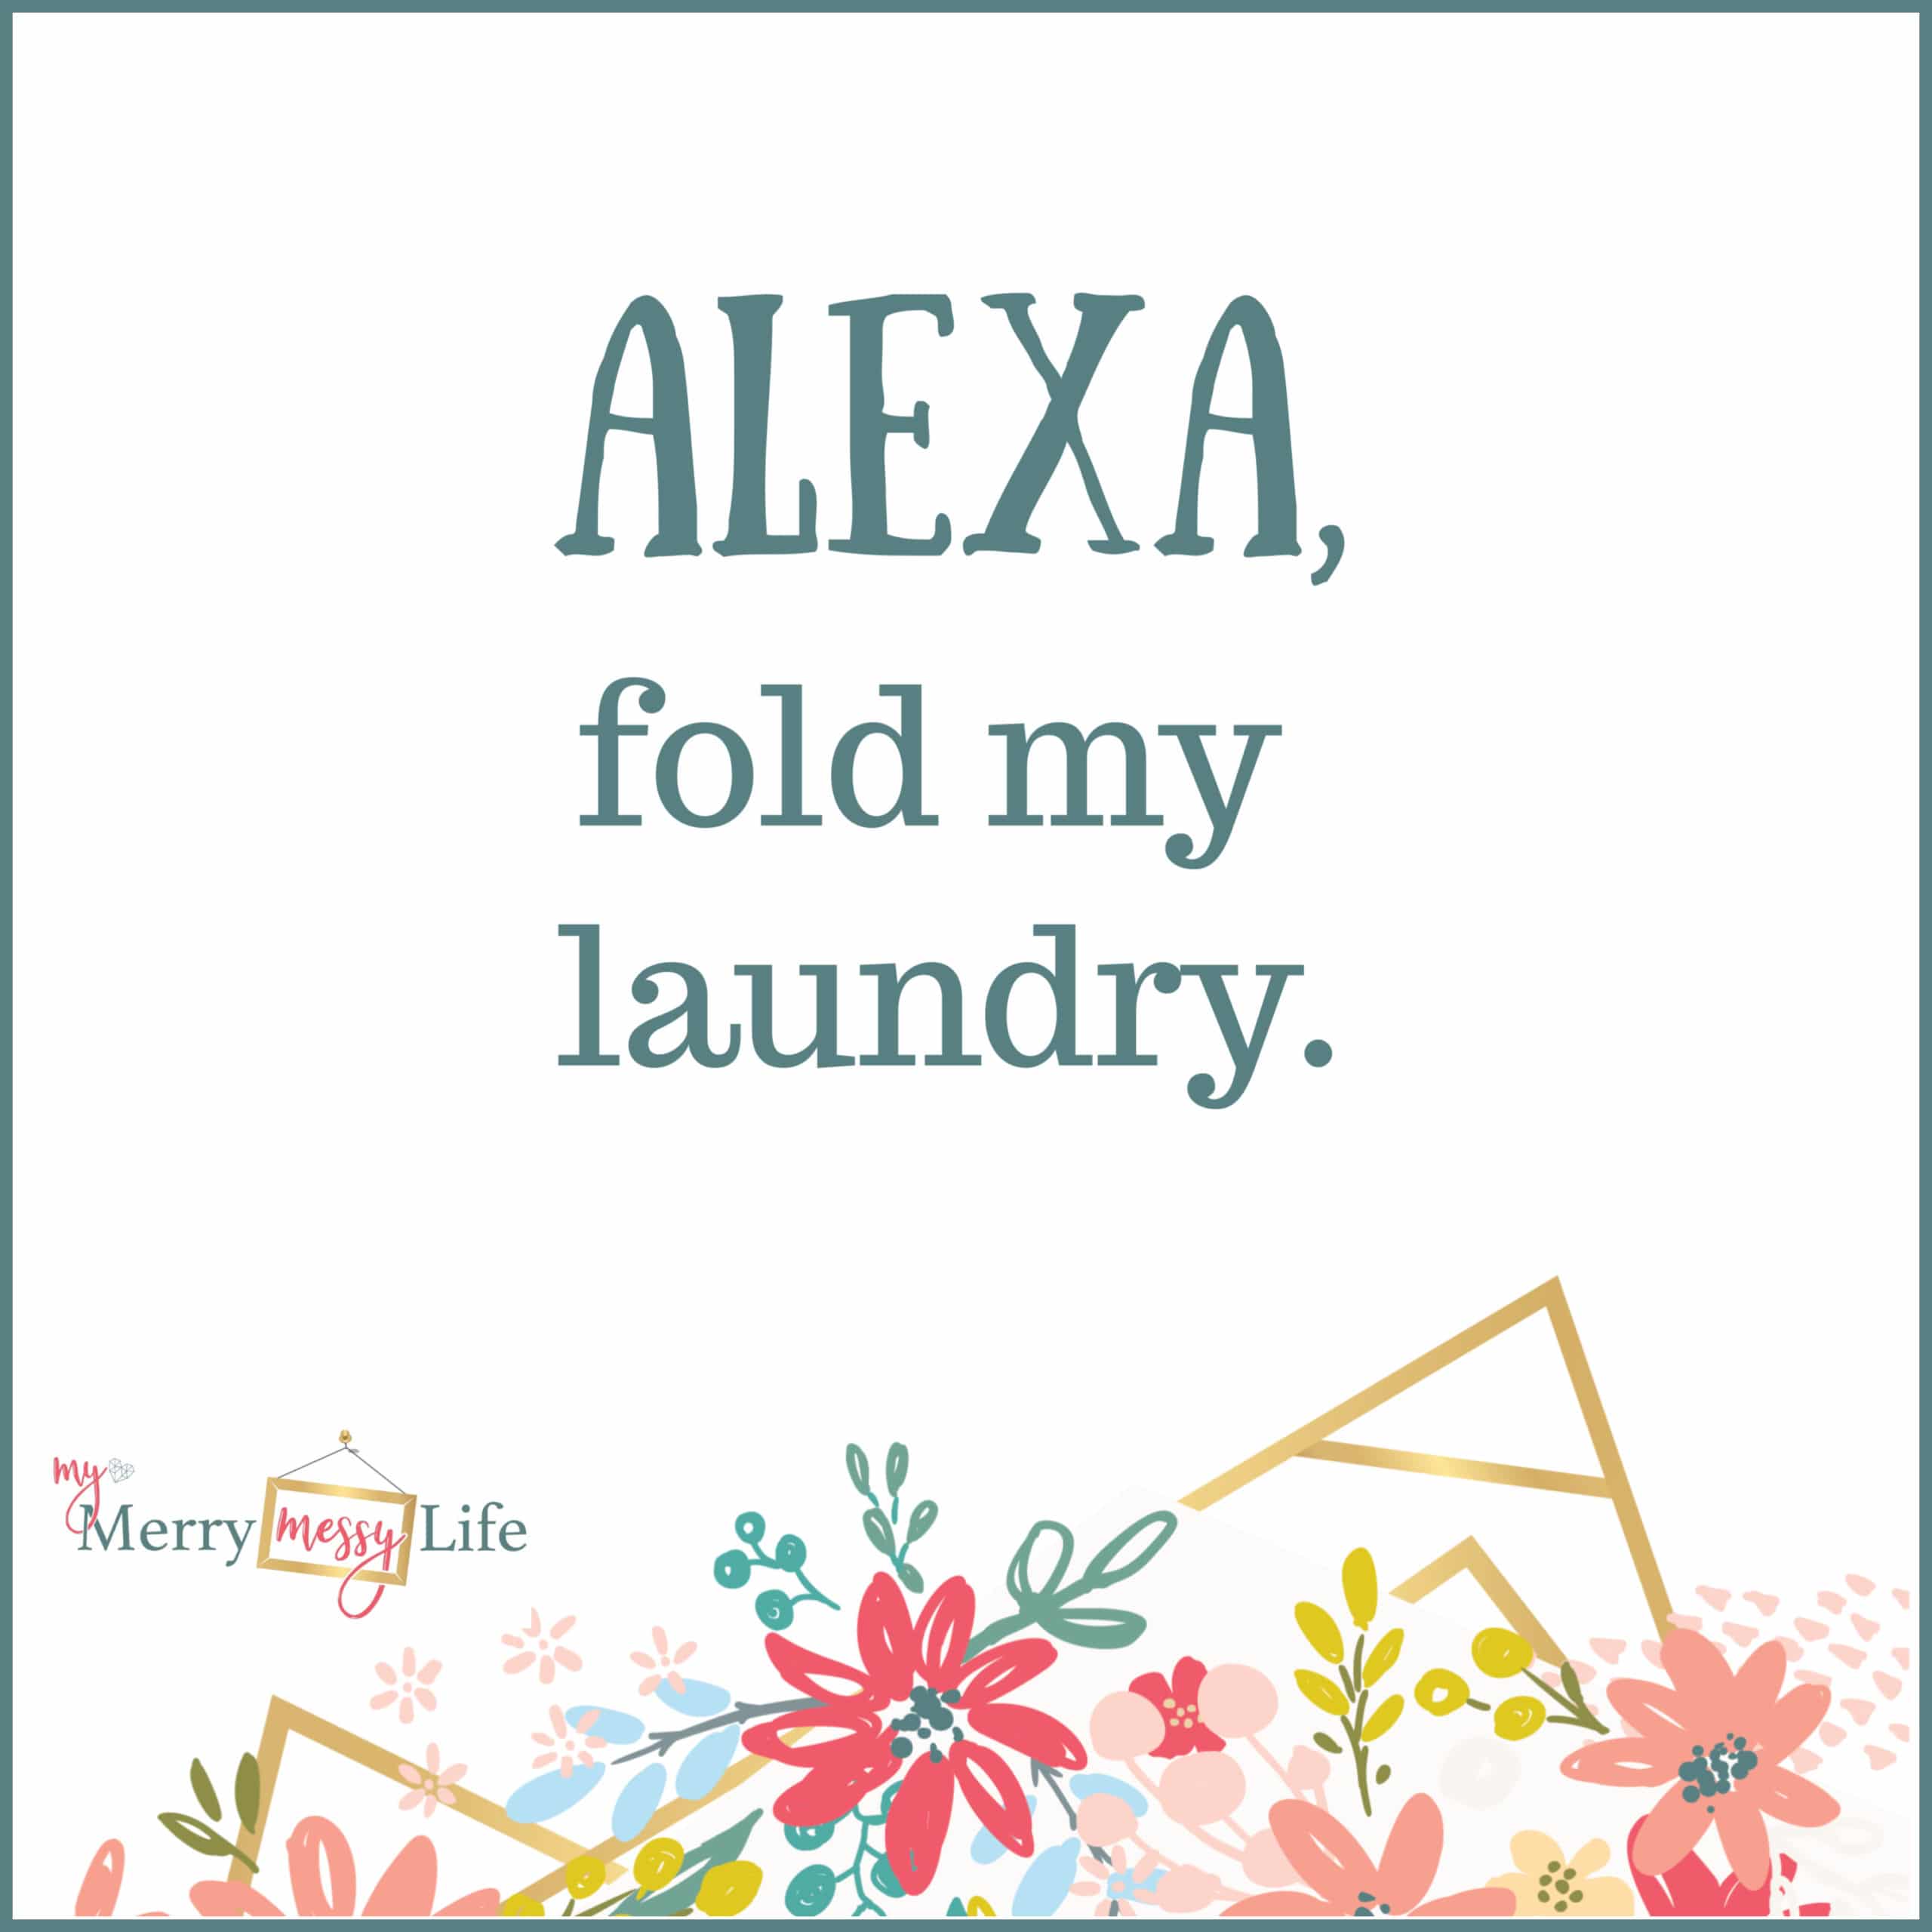 Funny Mom Memes about Laundry – My Merry Messy Life